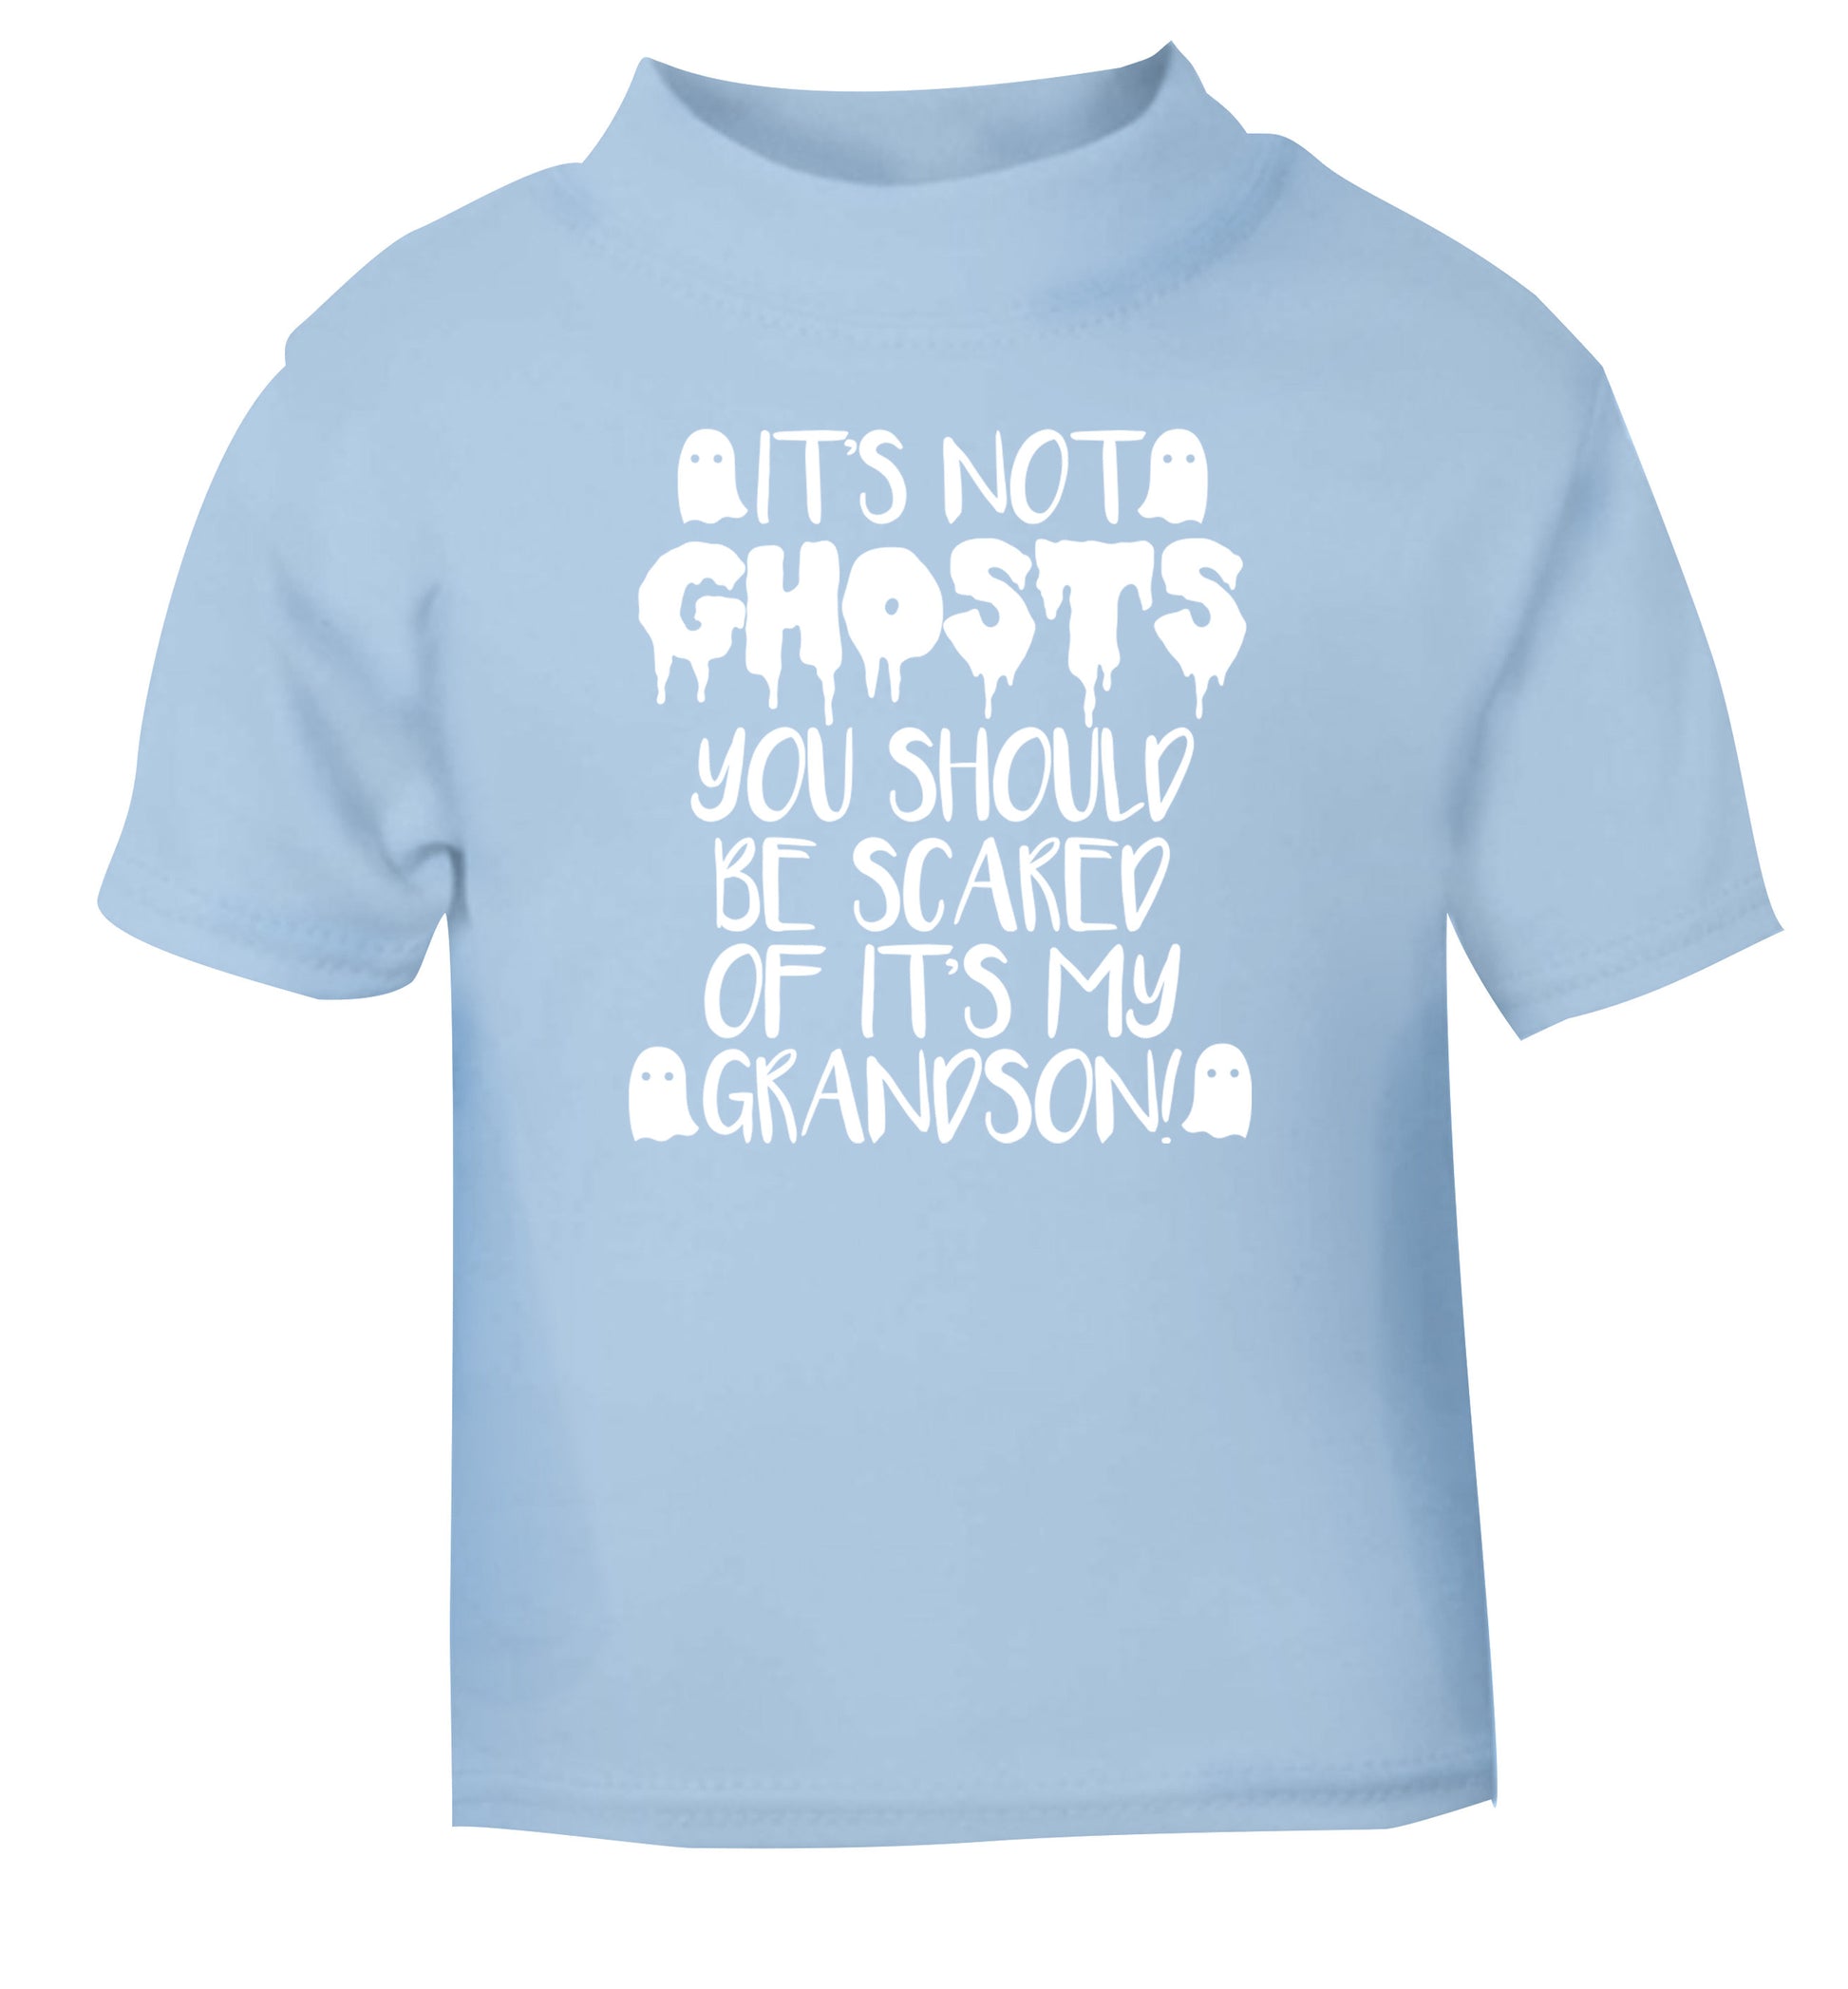 It's not ghosts you should be scared of it's my grandson! light blue Baby Toddler Tshirt 2 Years